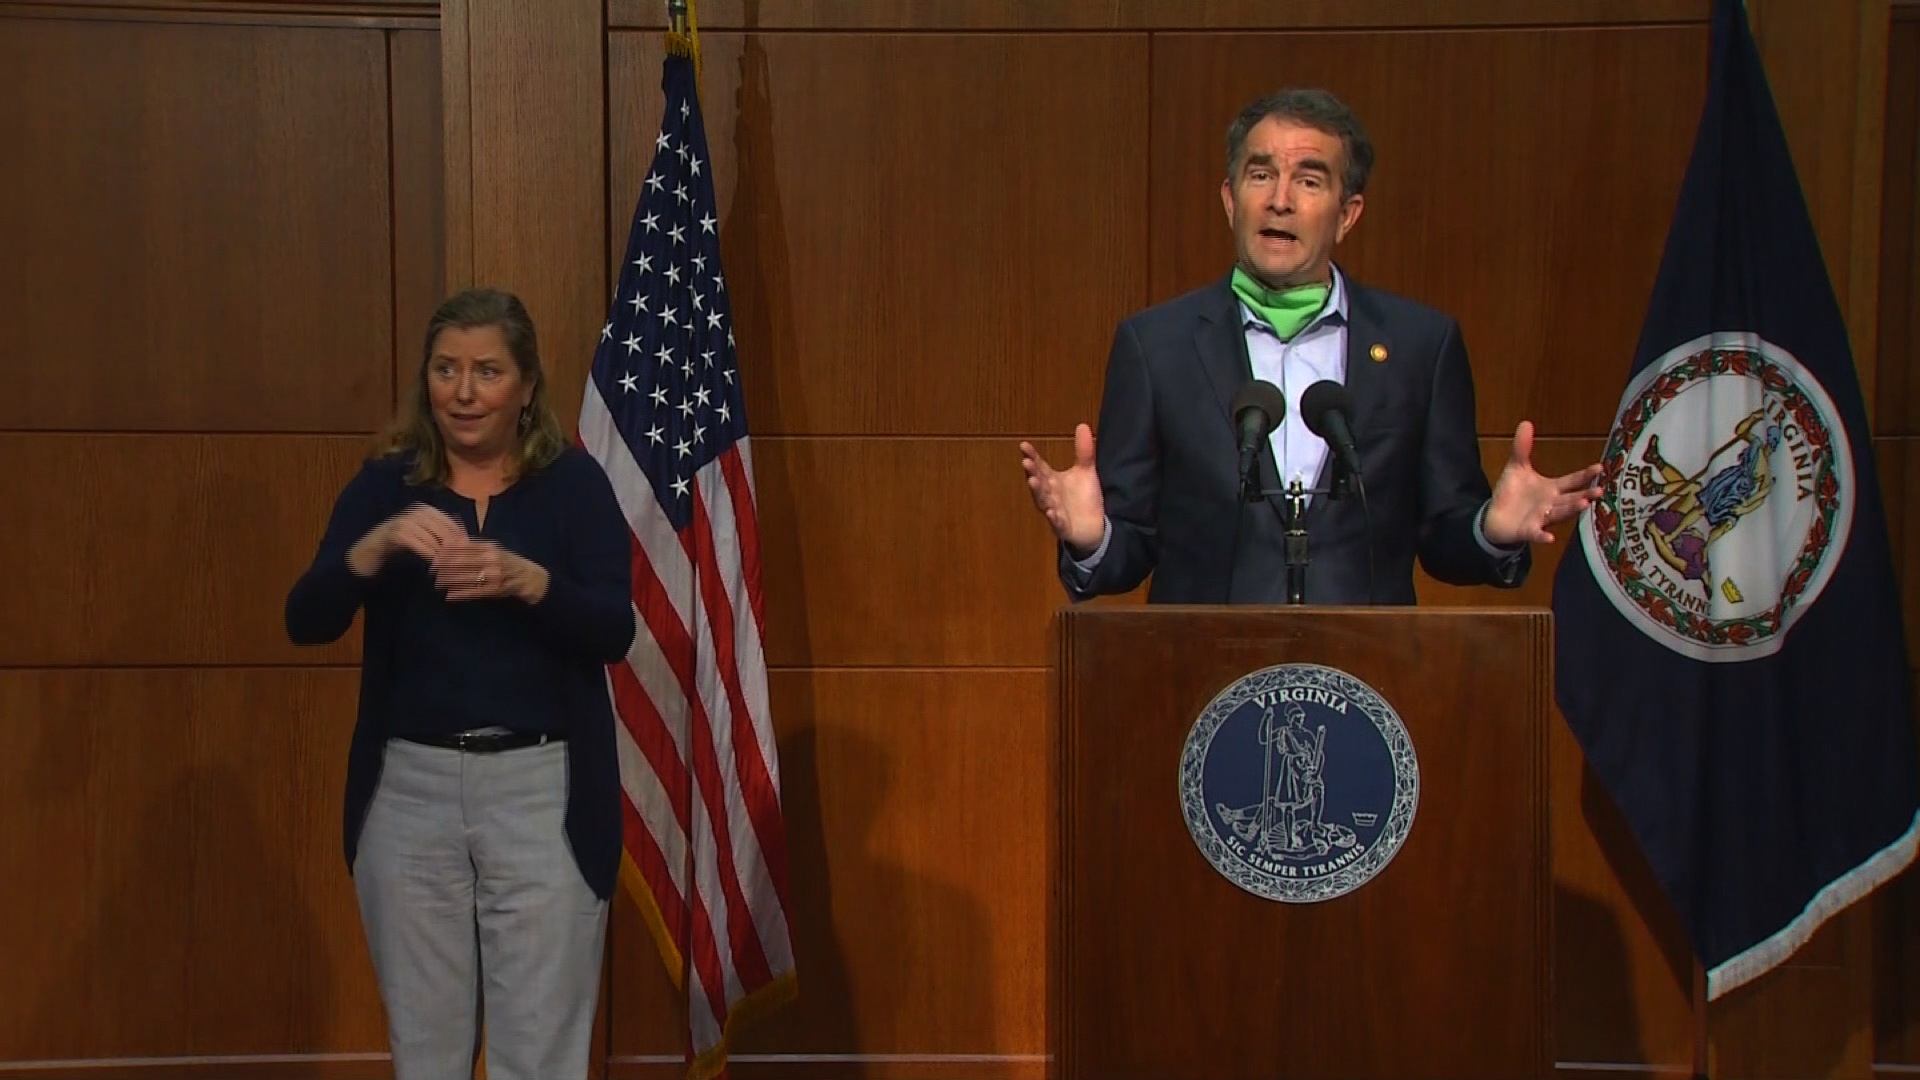 Virginia Gov. Ralph Northam speaks during a press conference in Richmond, Virginia, on May 26.